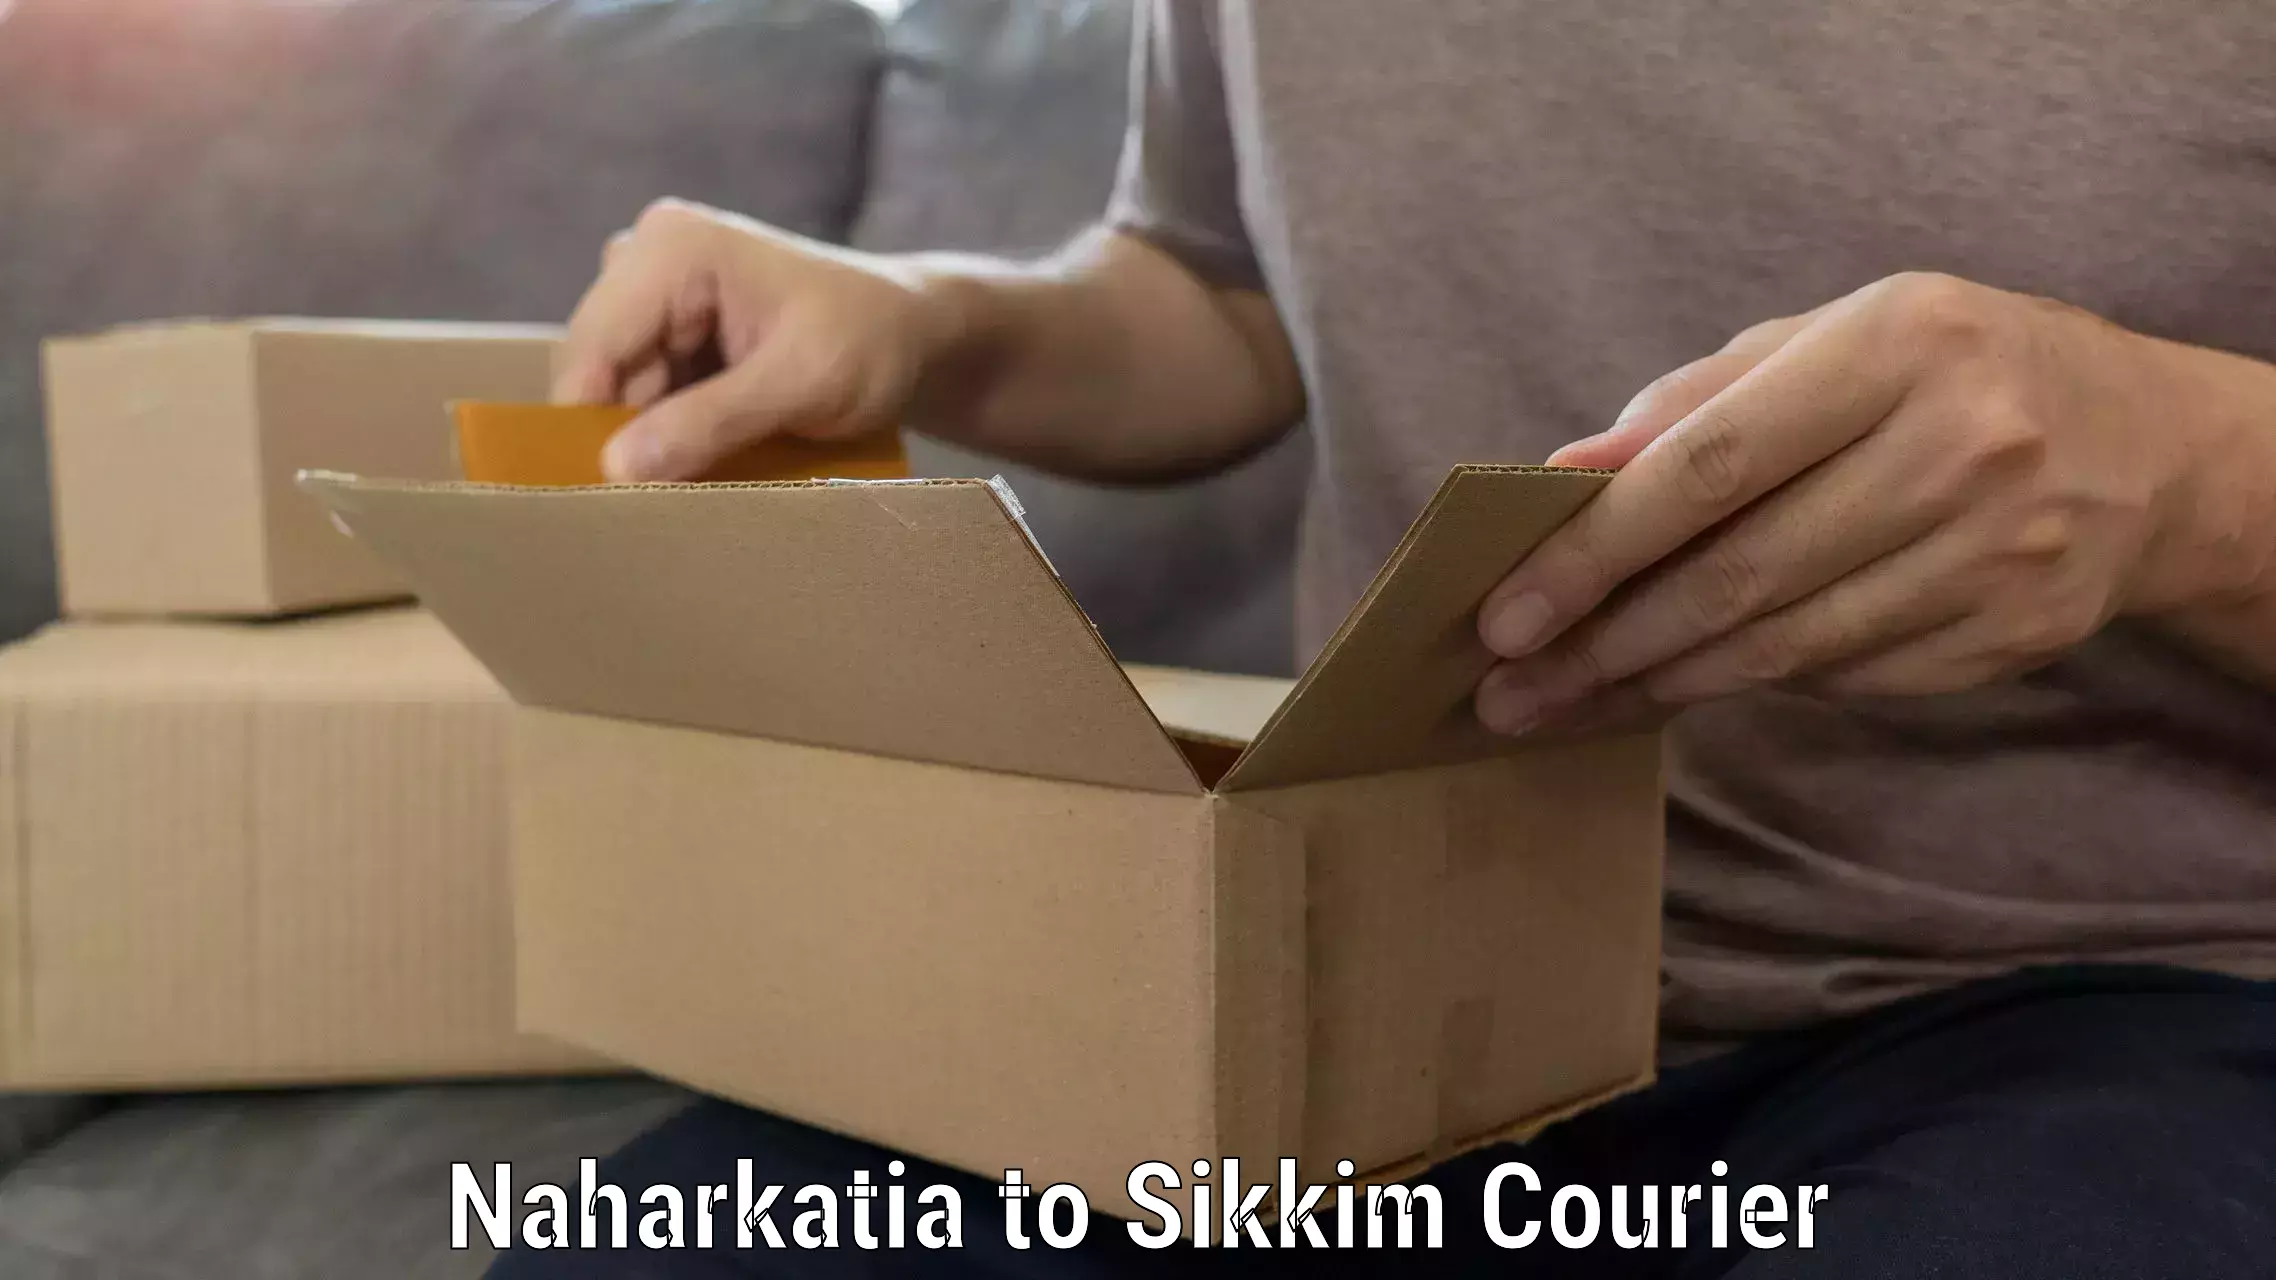 Furniture delivery service Naharkatia to Sikkim